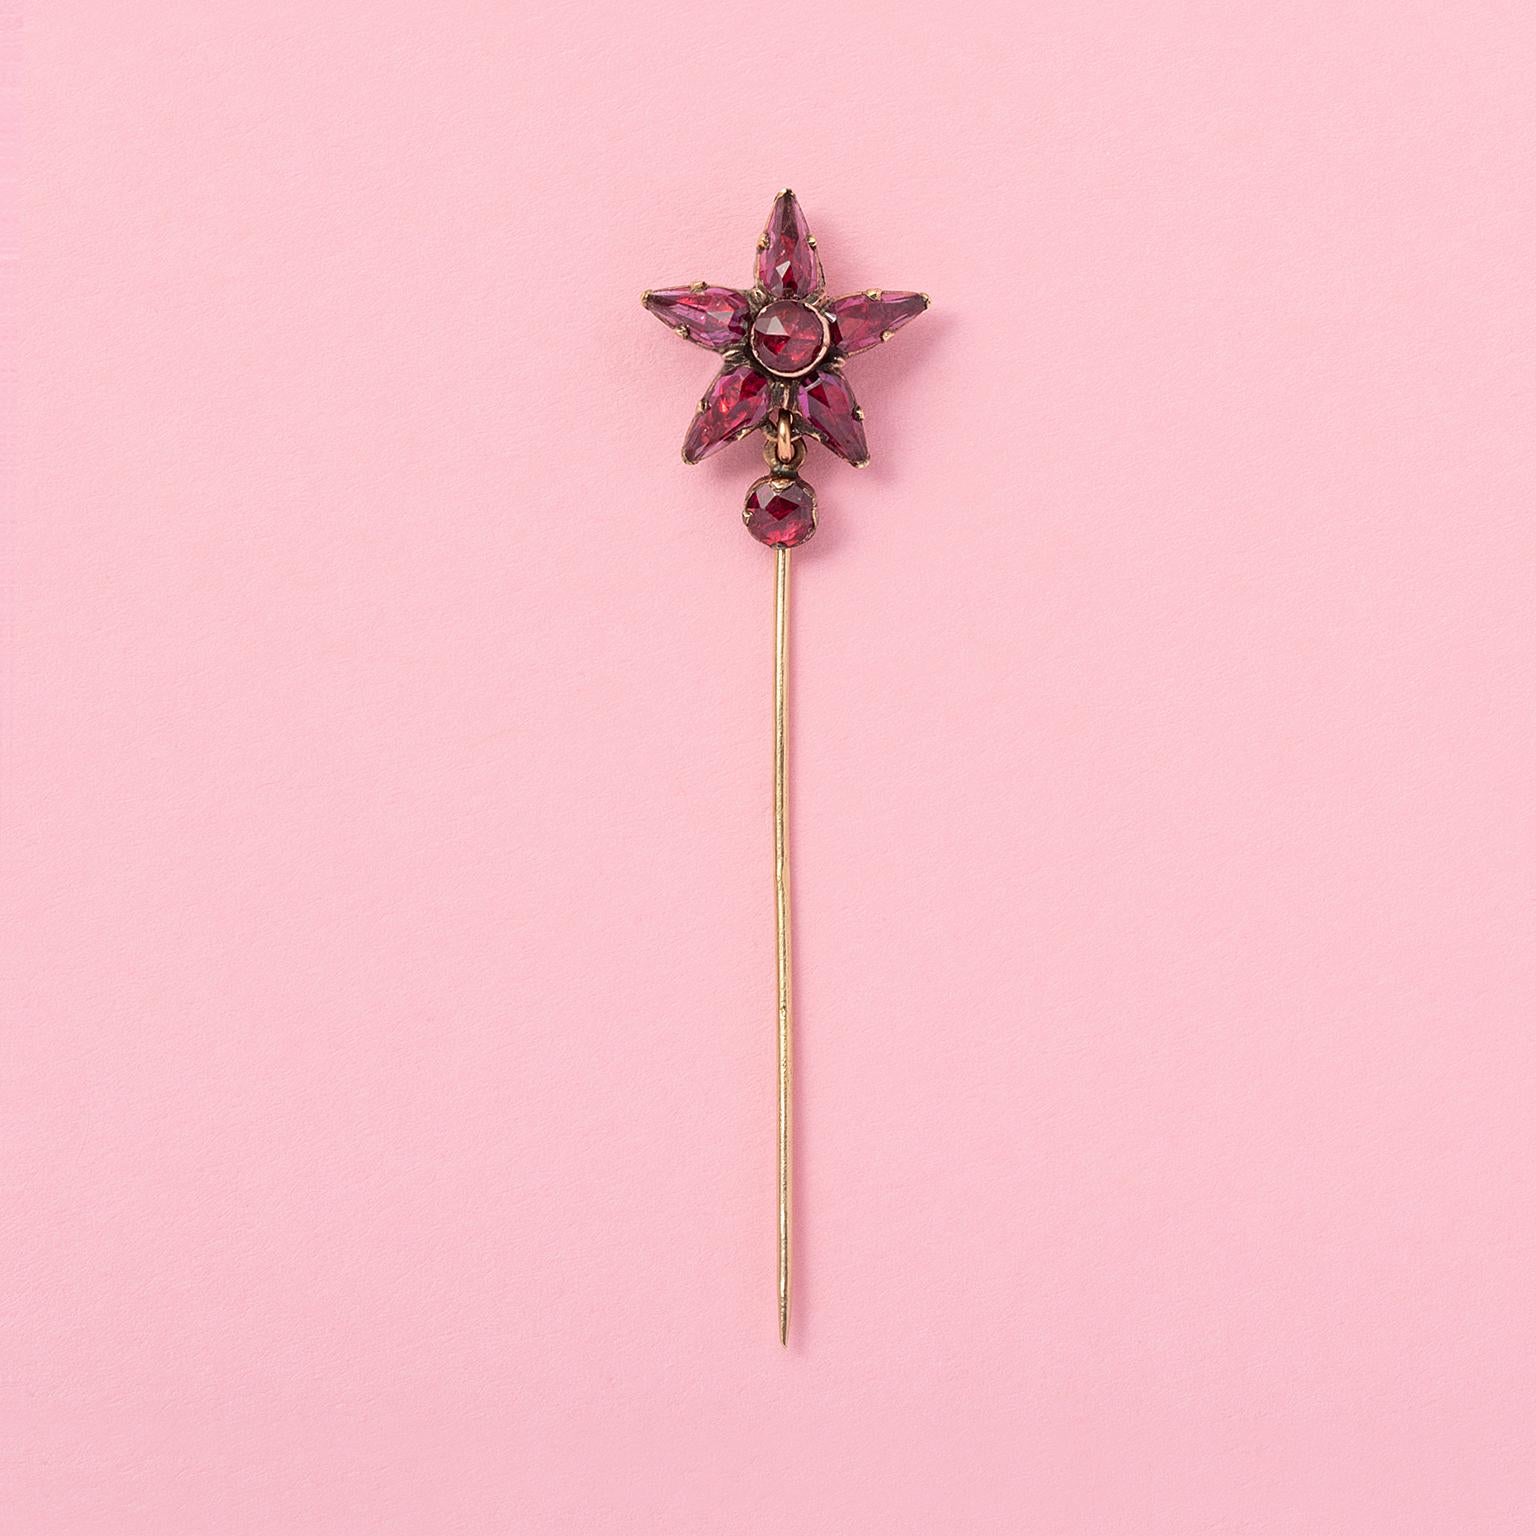 An 18 carat gold stick pin with a star and drop of rose cut rhodolite garnets set on red gold foil, South of France circa 1880.

weight: 2.03 grams
dimensions: 6.5 x 1.6 cm